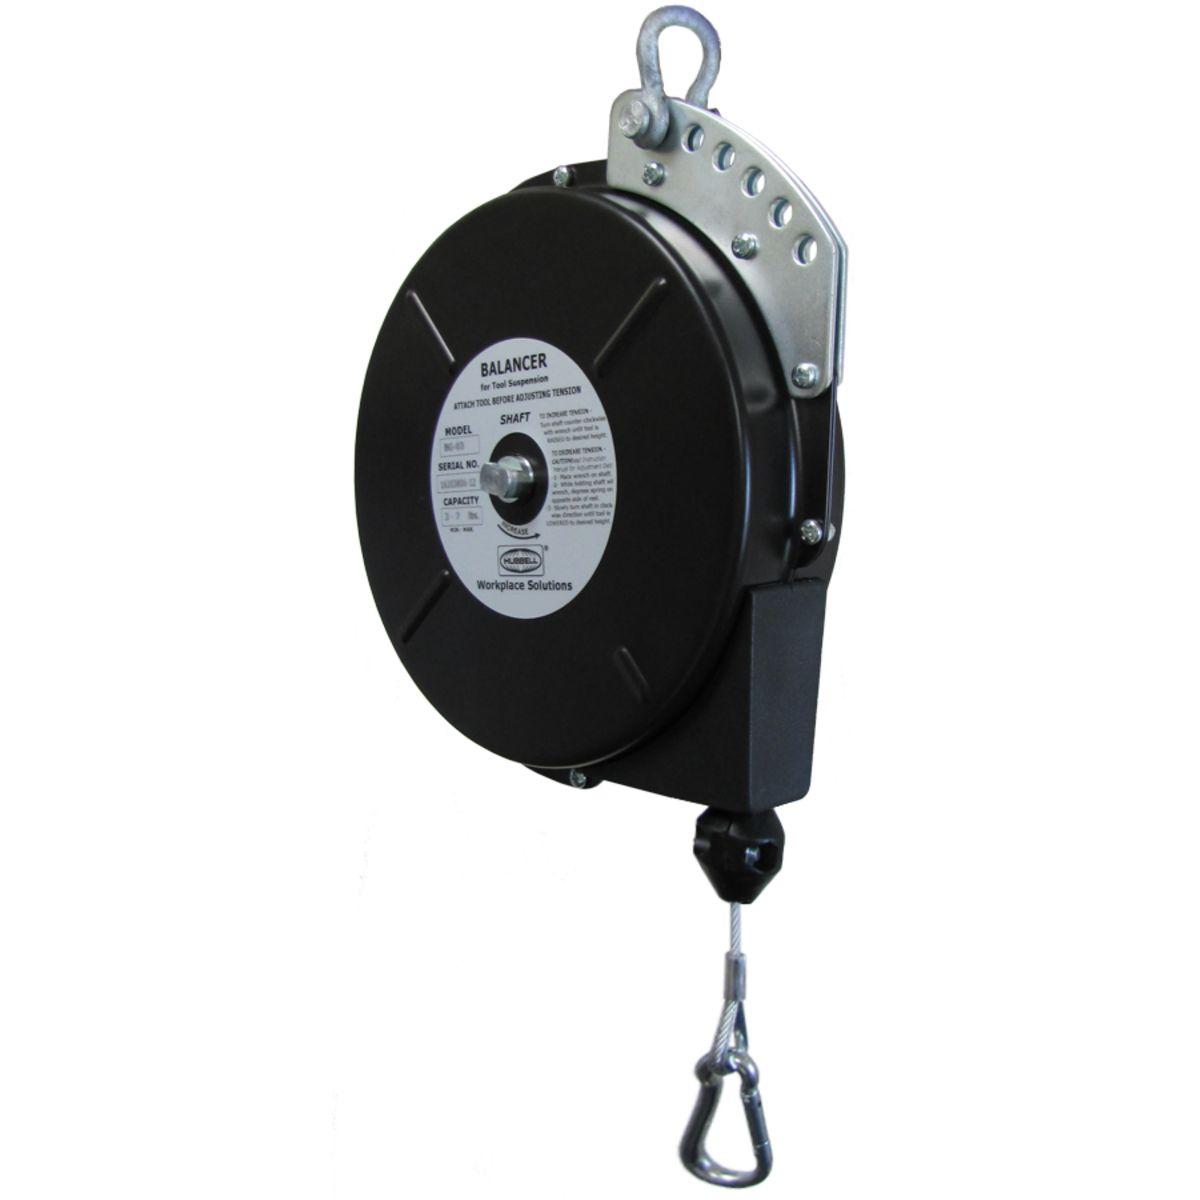 Hubbell BG-10 Balance Reel 8.0 - 12.0 lbs.  ; Rugged steel construction  with  black  polyester  baked  finish ; Reinforced  hanging  bracket  with forged  clevis  for ceiling mounting and extra holes for safety chain attachment ; Spring  is  permanently  lubricated,In